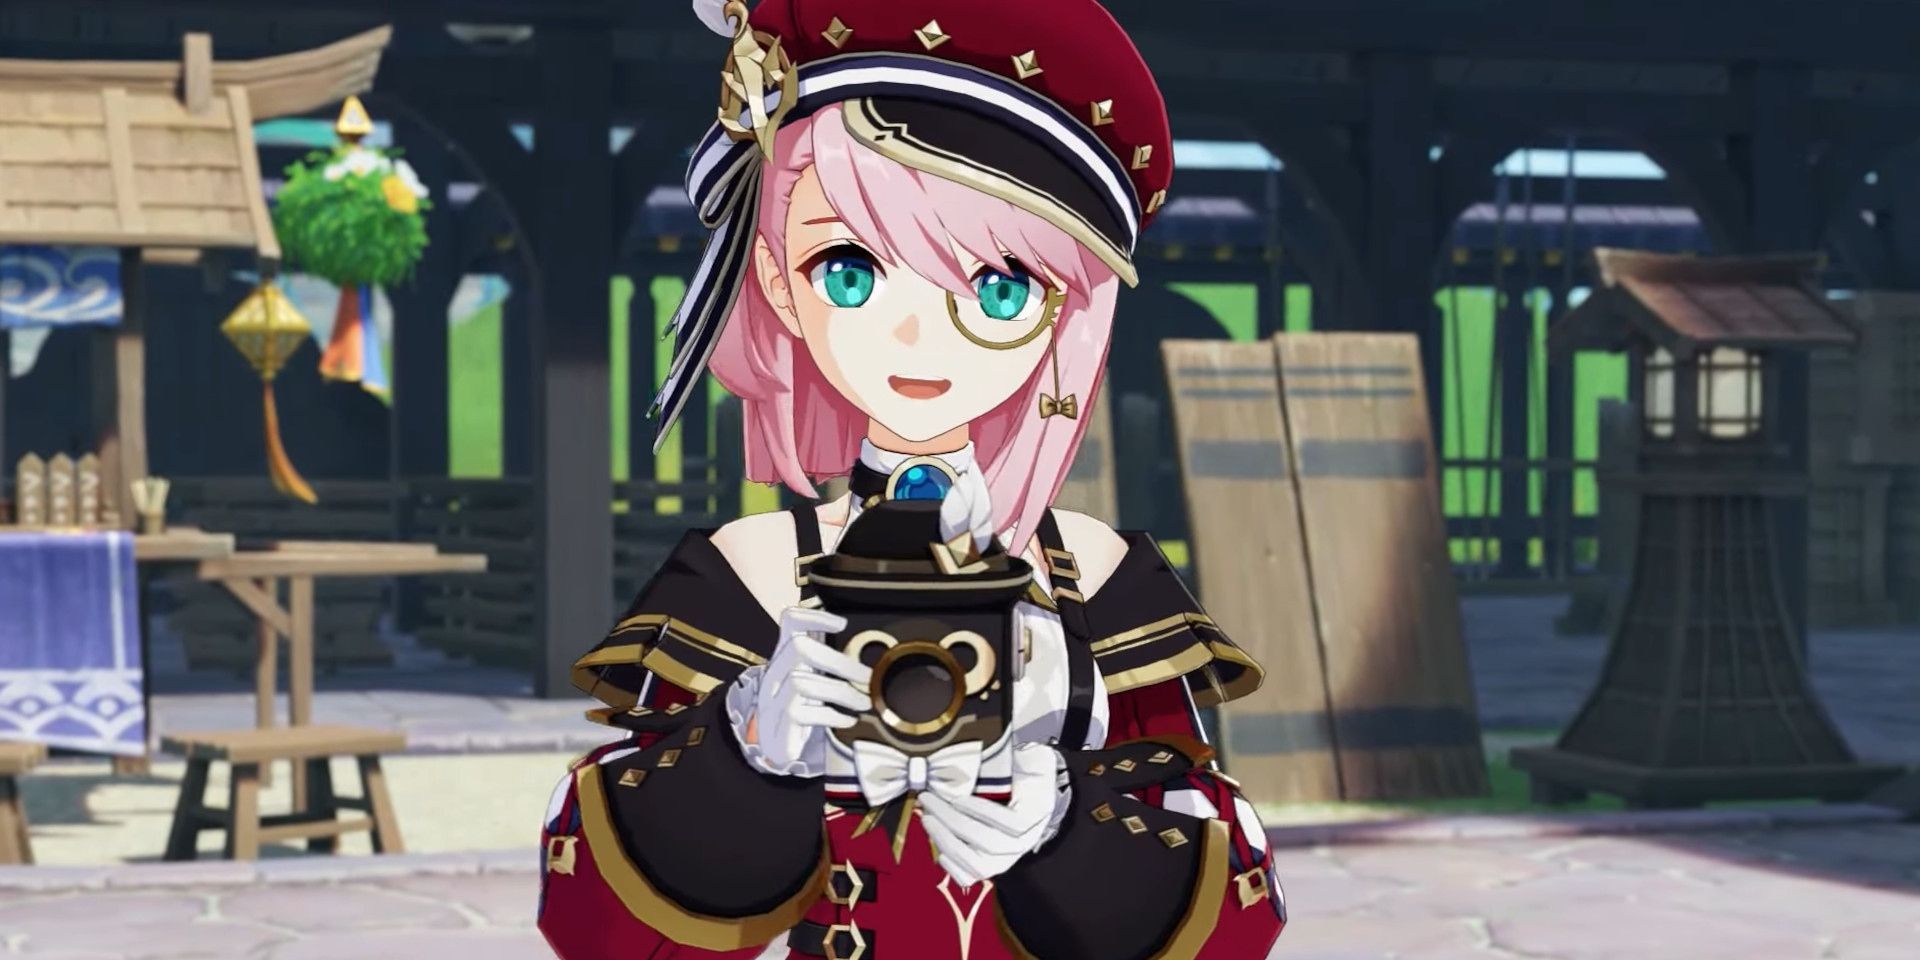 Genshin Impact's Charlotte holds a Kamera gadget in her hands while she smiles in the viewer's direction. She is in Inazuma, as seen from the style of the decorations in the background.